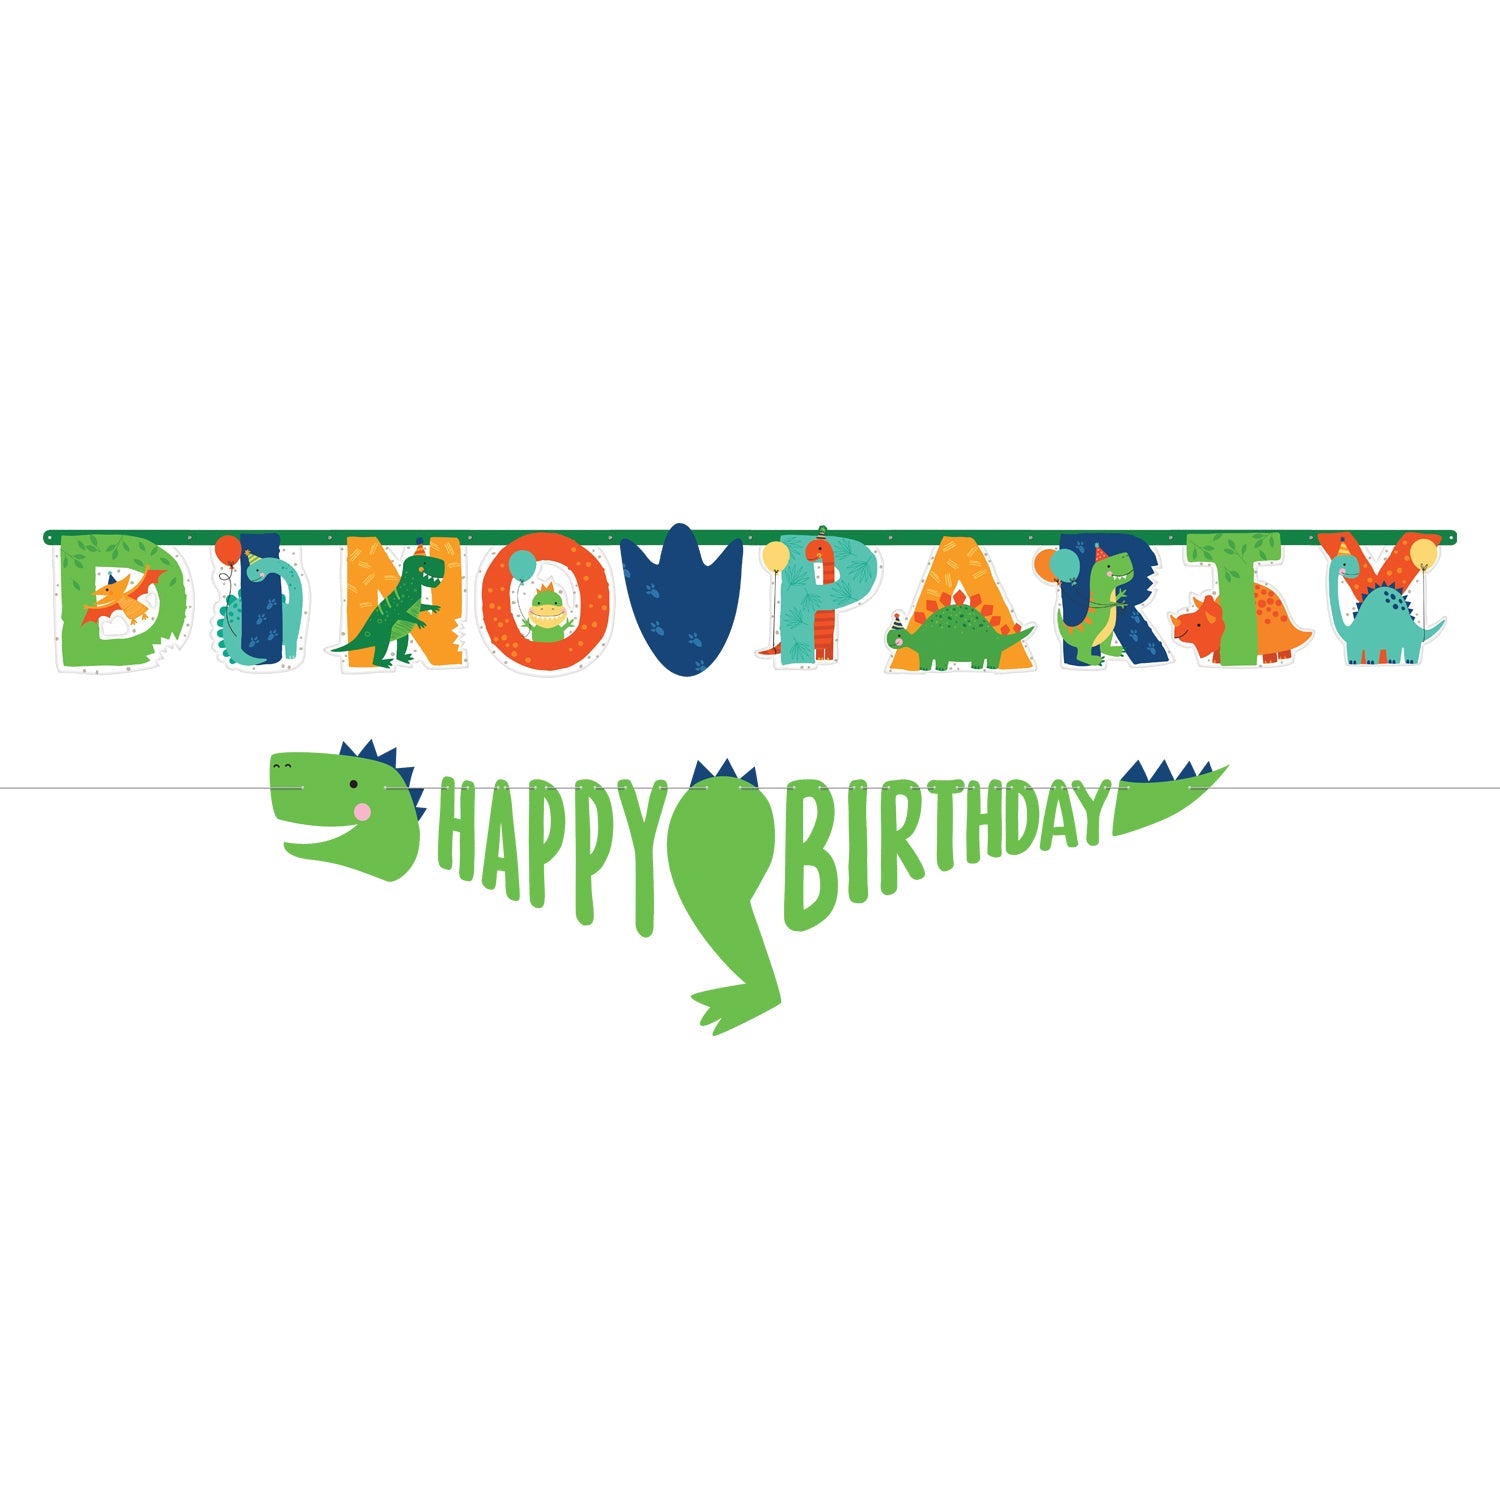 Dino-Mite Party Jumbo Personalised Letter Banner Kit includes, 1 Customisable Letter Banner 2.3m, 24 Attachable Pieces, 6 Pieces of double sided tape, 1 Mini Banner 1.82m